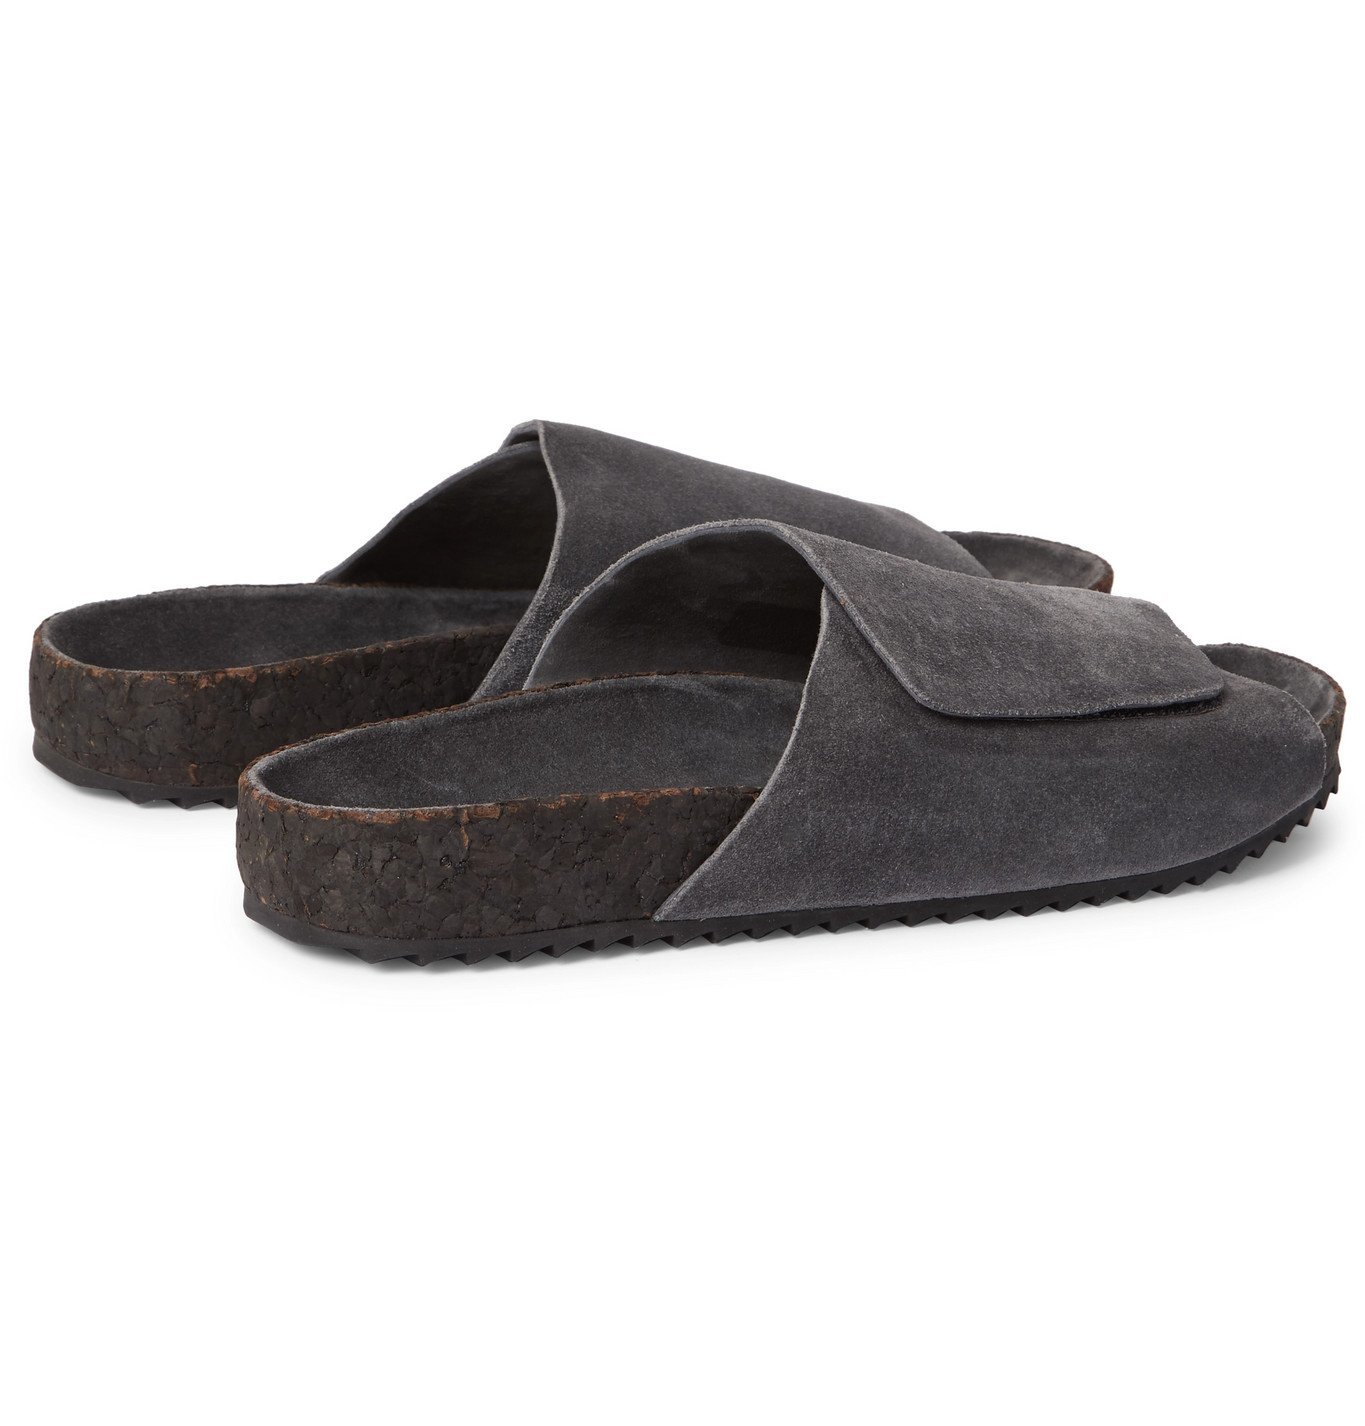 James Perse - Suede Slides - Gray James Perse